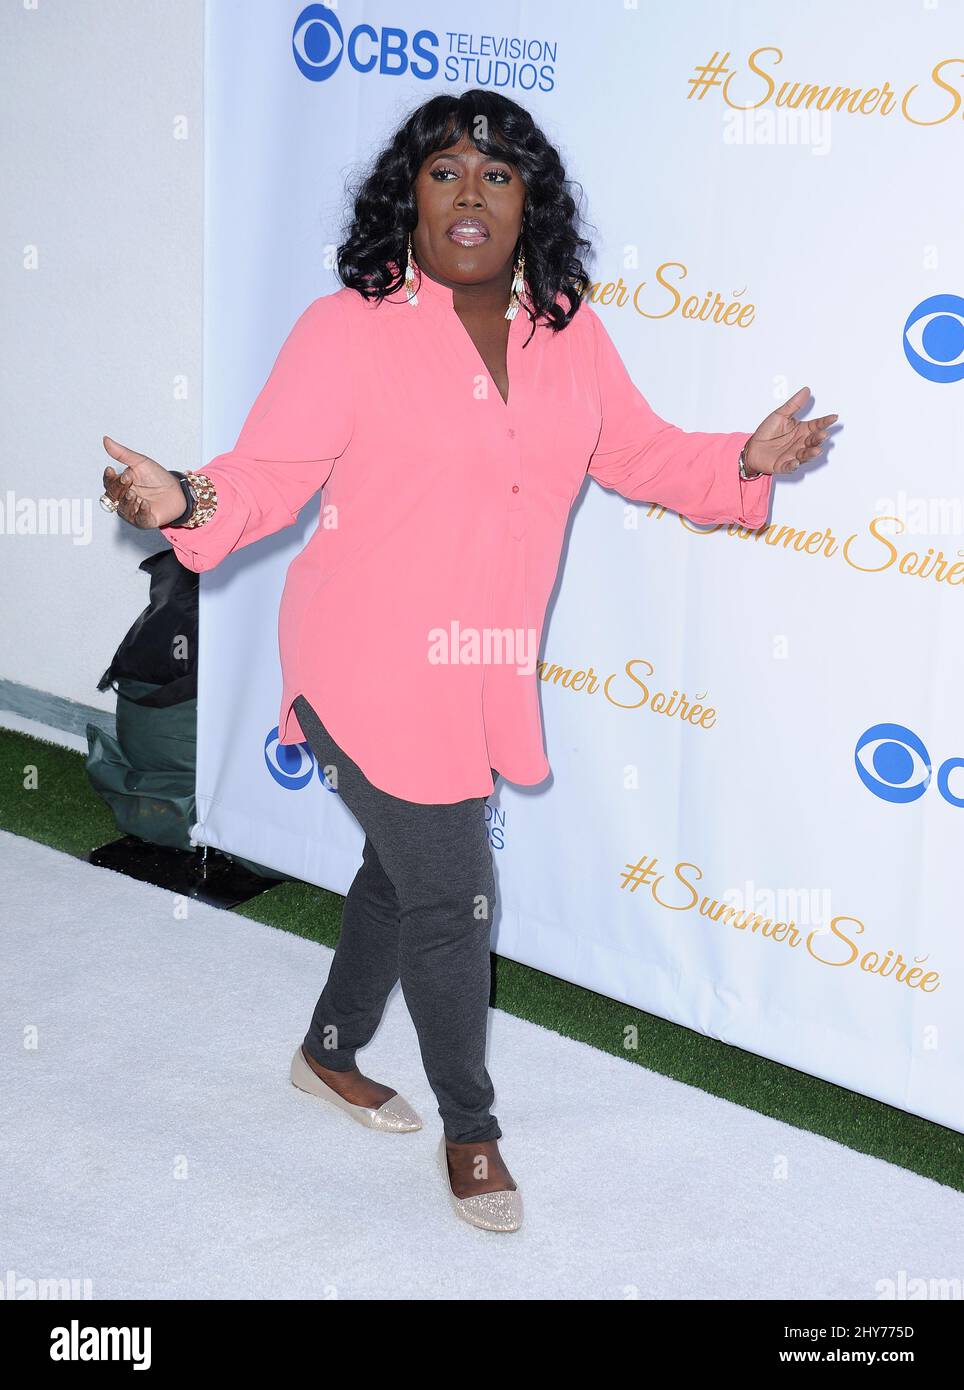 Sheryl Underwood attending the CBS Summer Soiree held at The London Hotel Stock Photo